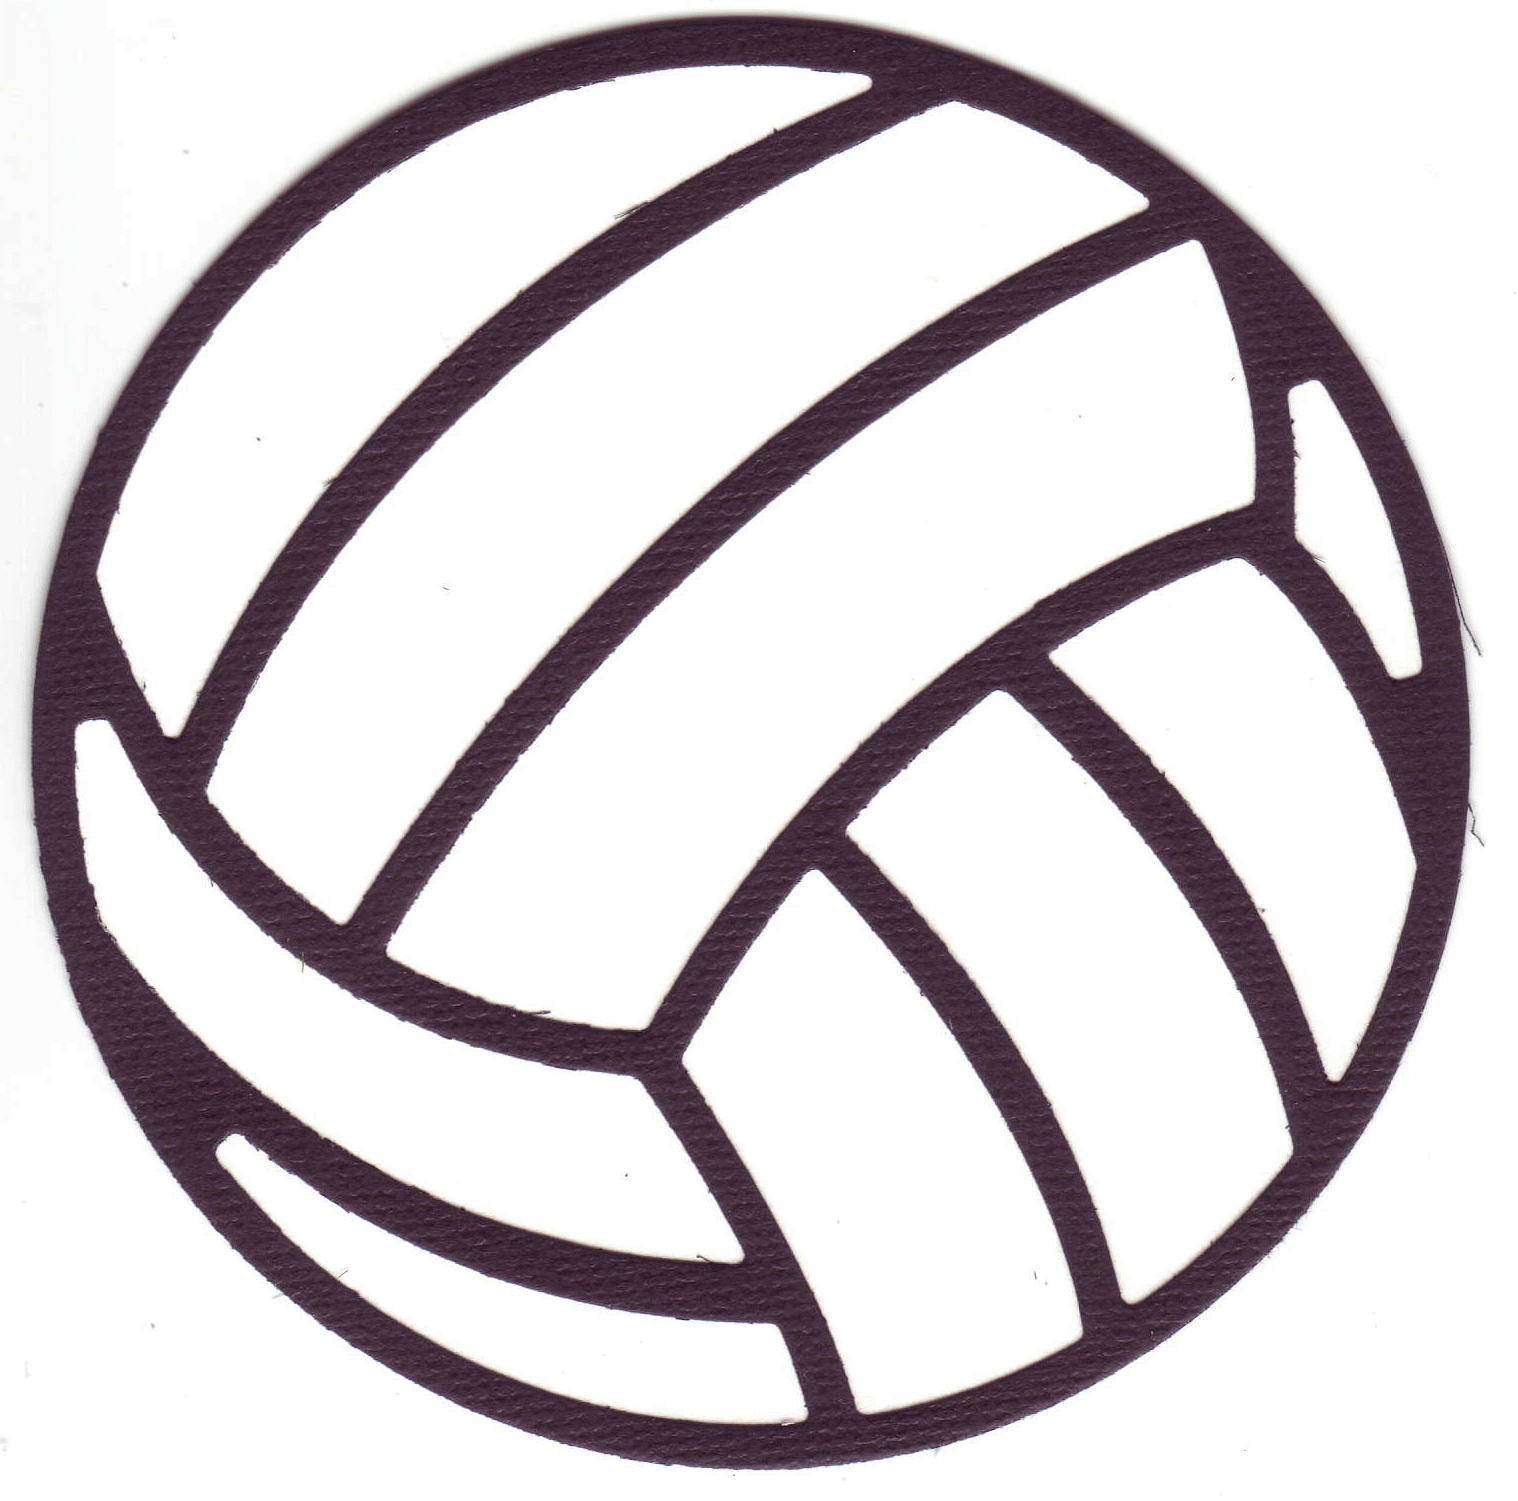 Free images download clip. Volleyball clipart volleyball ball